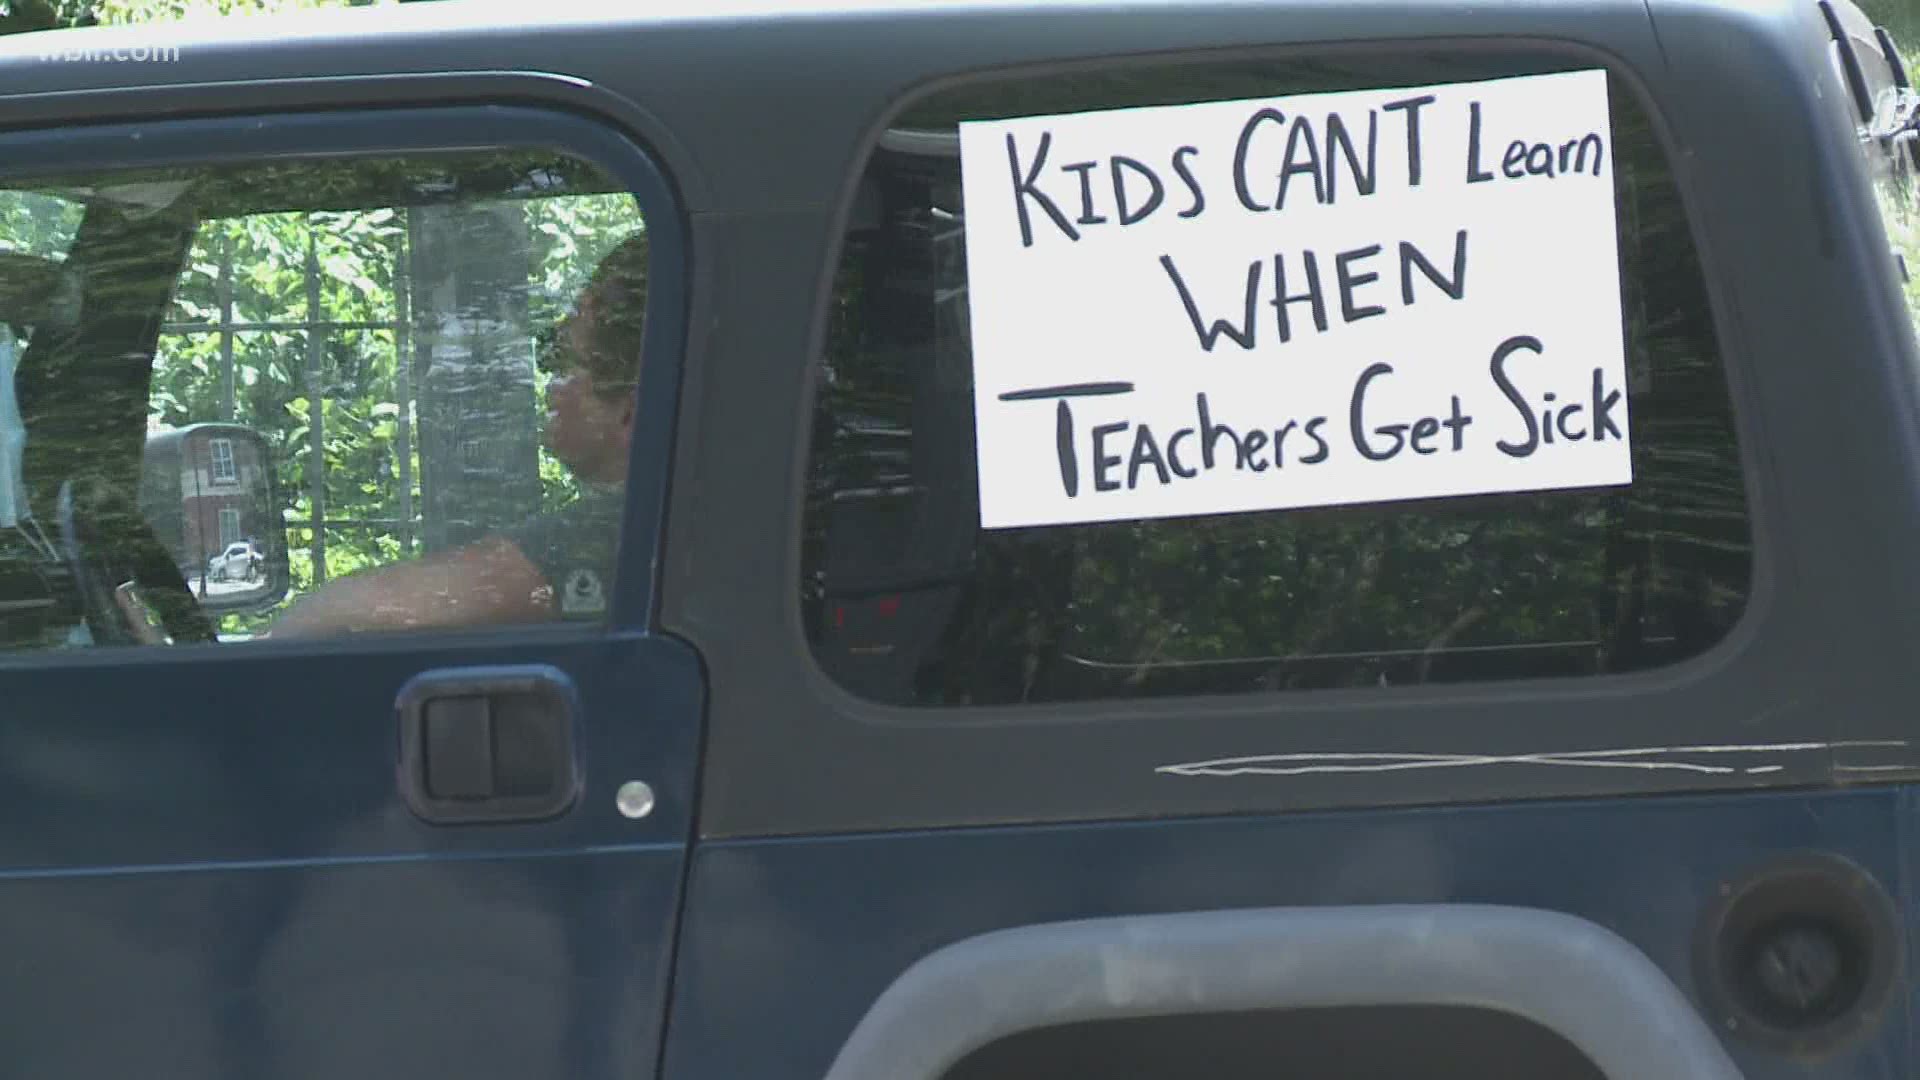 Knox County parents and teachers held a "Honk-A-Thon" protest in downtown Knoxville today.
They held signs from their car windows and honked - to protest going back